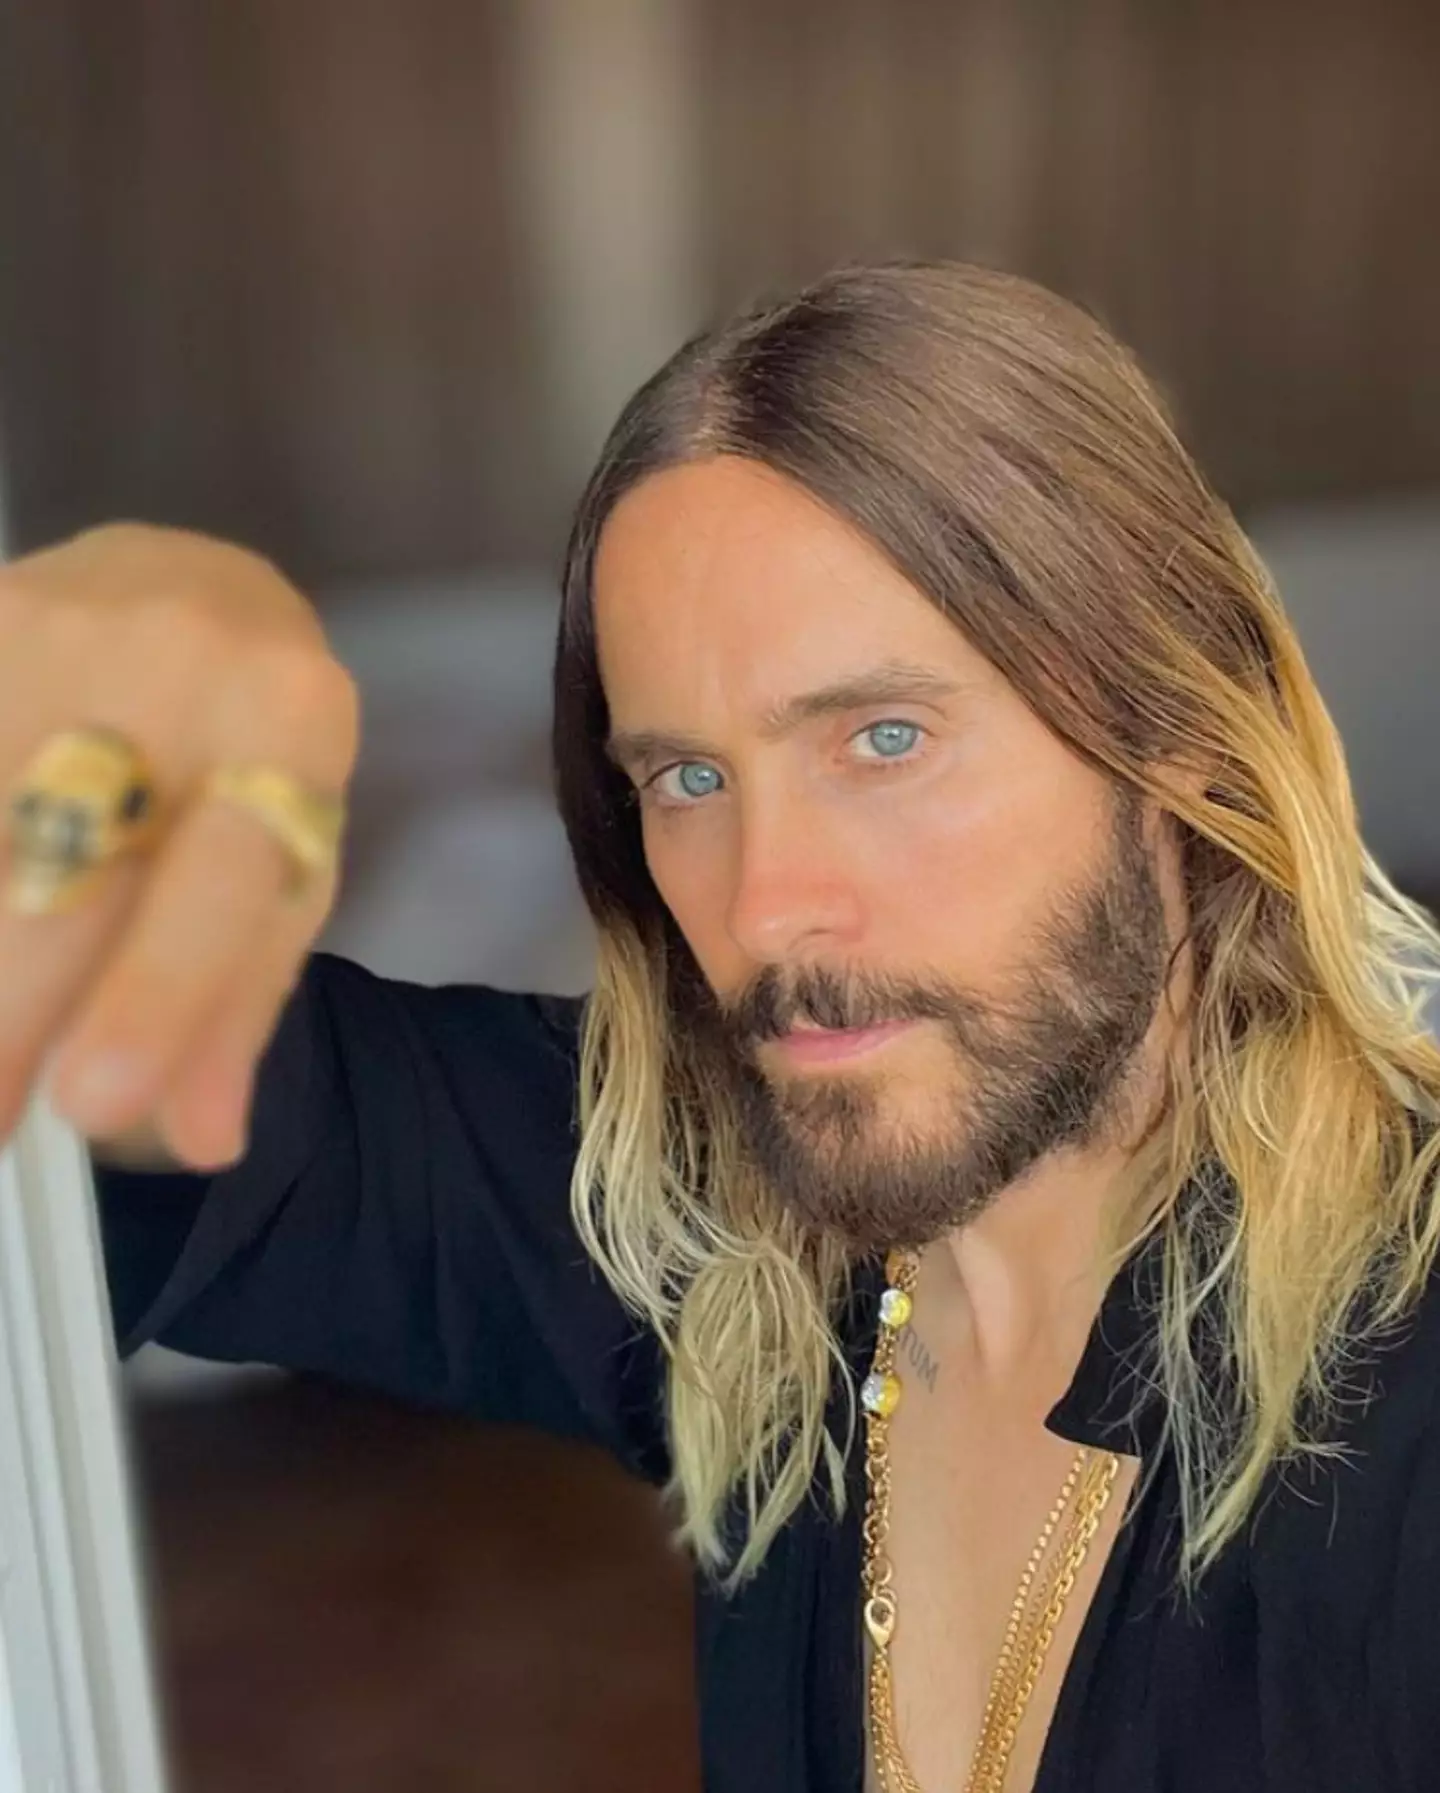 Jared Leto says he hasn’t cried for ‘about 17 years’.